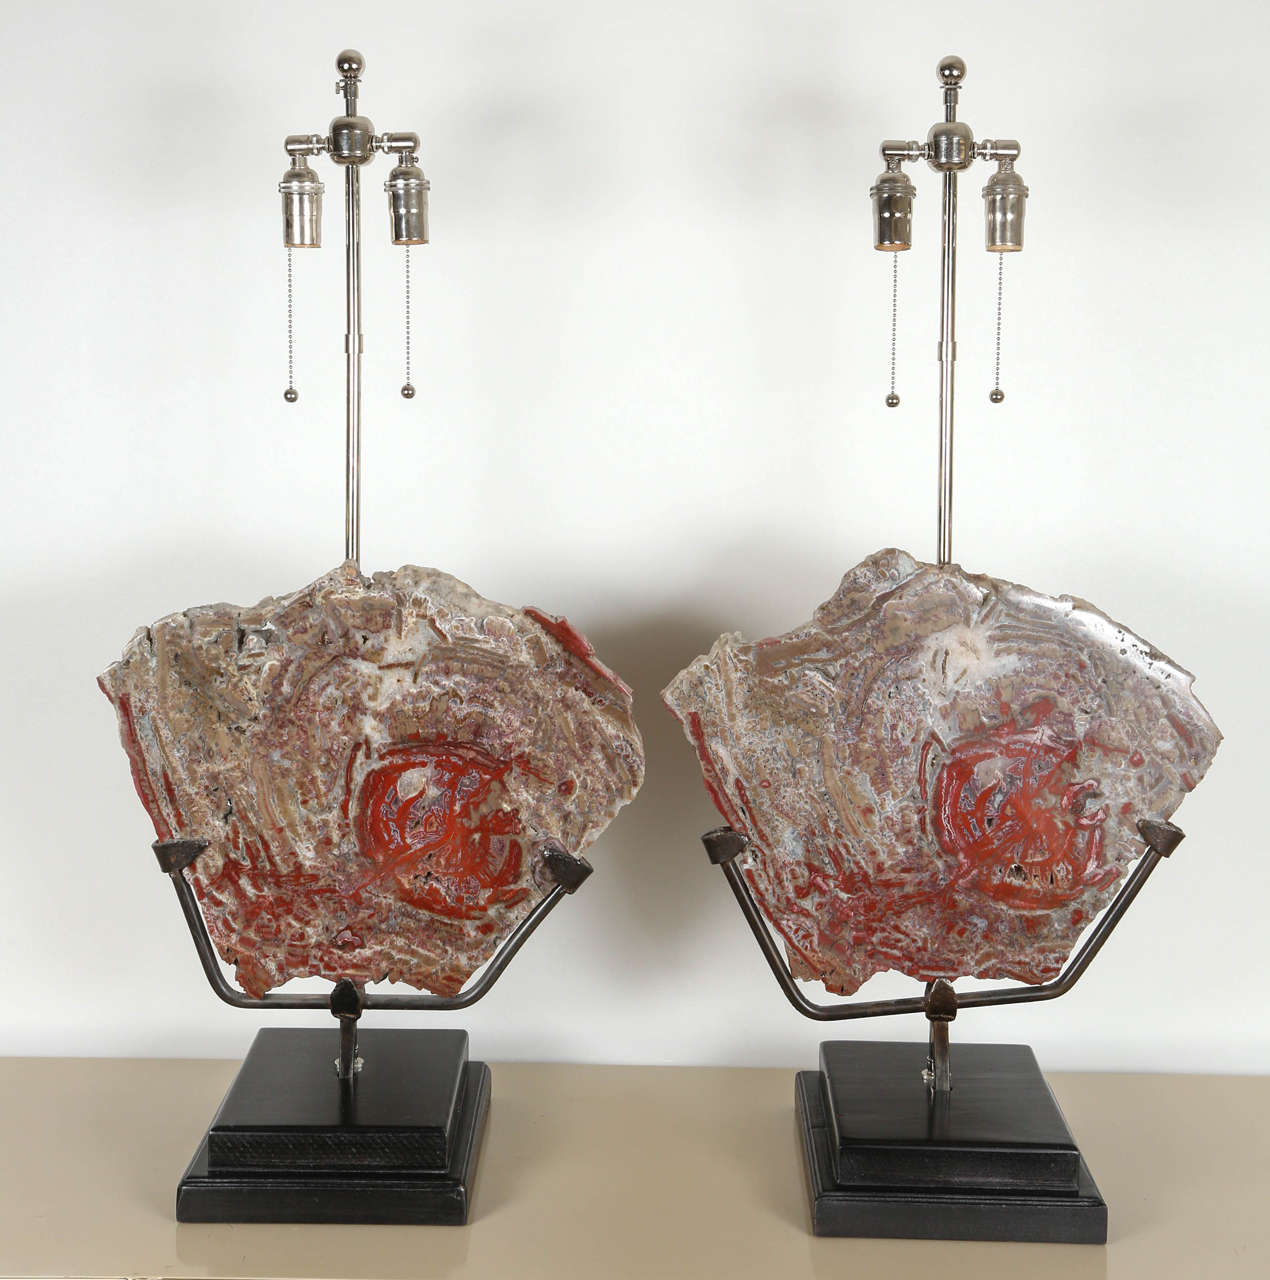 Pair of lamps made of spectacular matched and polished slabs of petrified wood mounted in metal frames on wooden bases. The lamps have been. Newly rewired with nickel-plated double clusters.